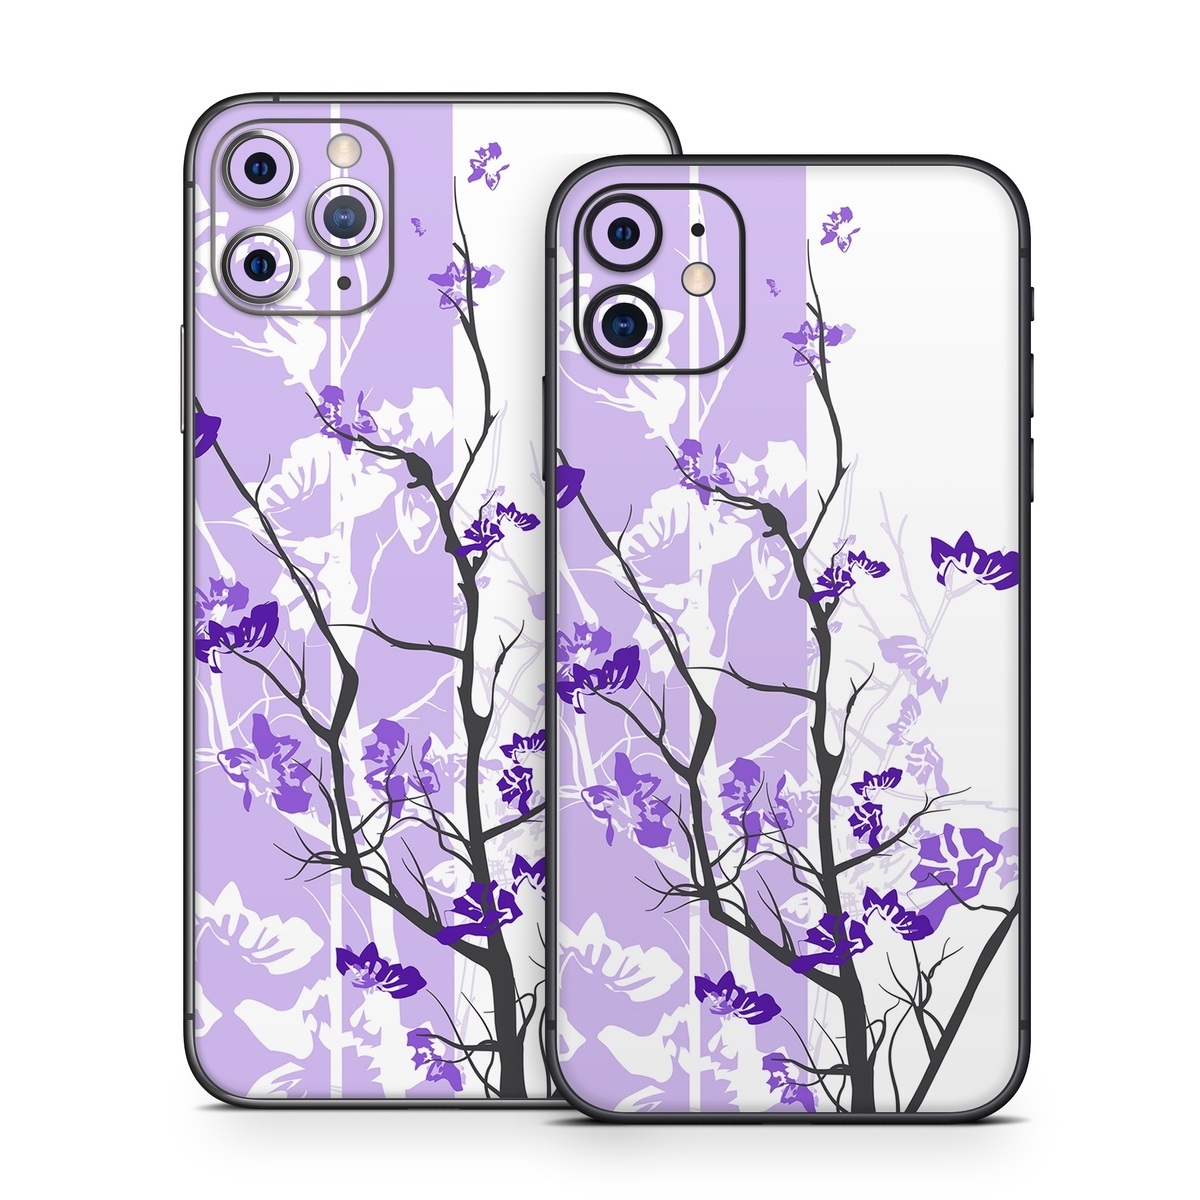 iPhone 11 Skin design of Branch, Purple, Violet, Lilac, Lavender, Plant, Twig, Flower, Tree, Wildflower, with white, purple, gray, pink, black colors